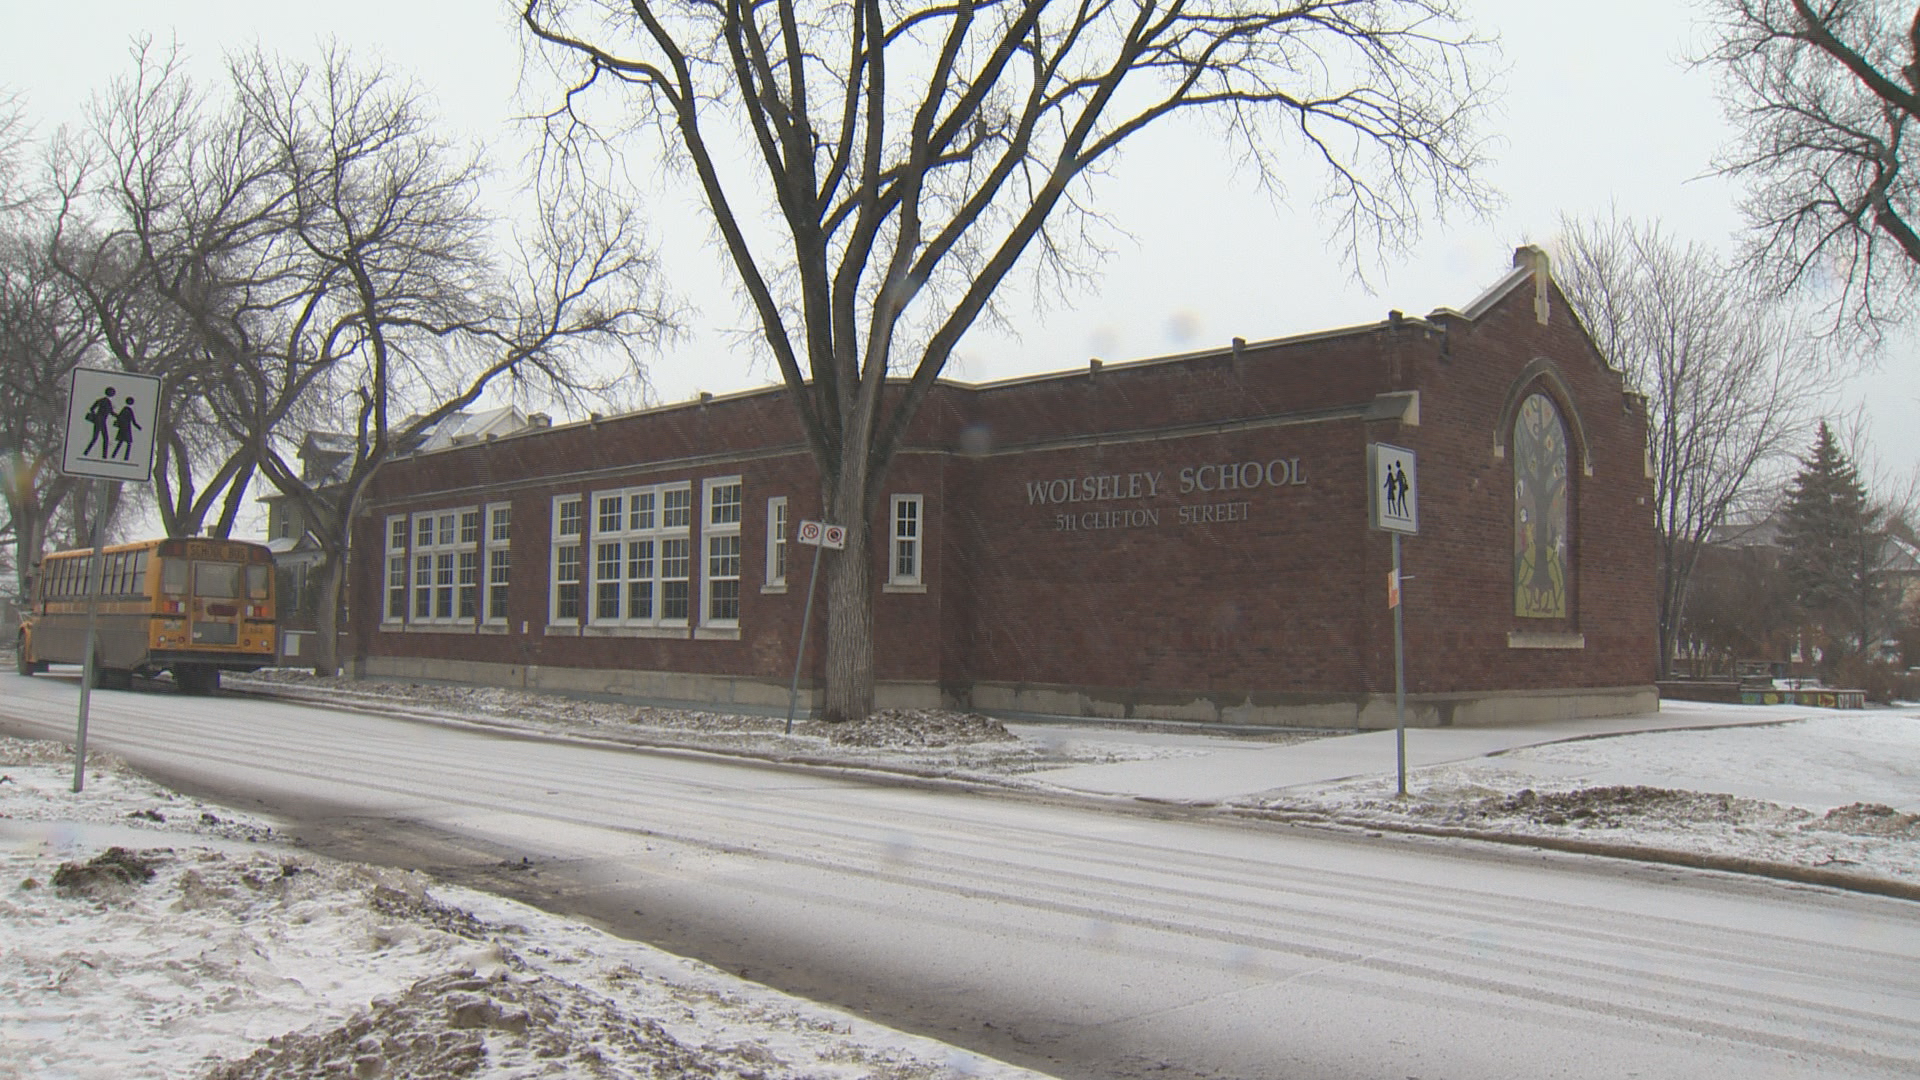 Request to change the name of a Winnipeg school underway, board of trustees says